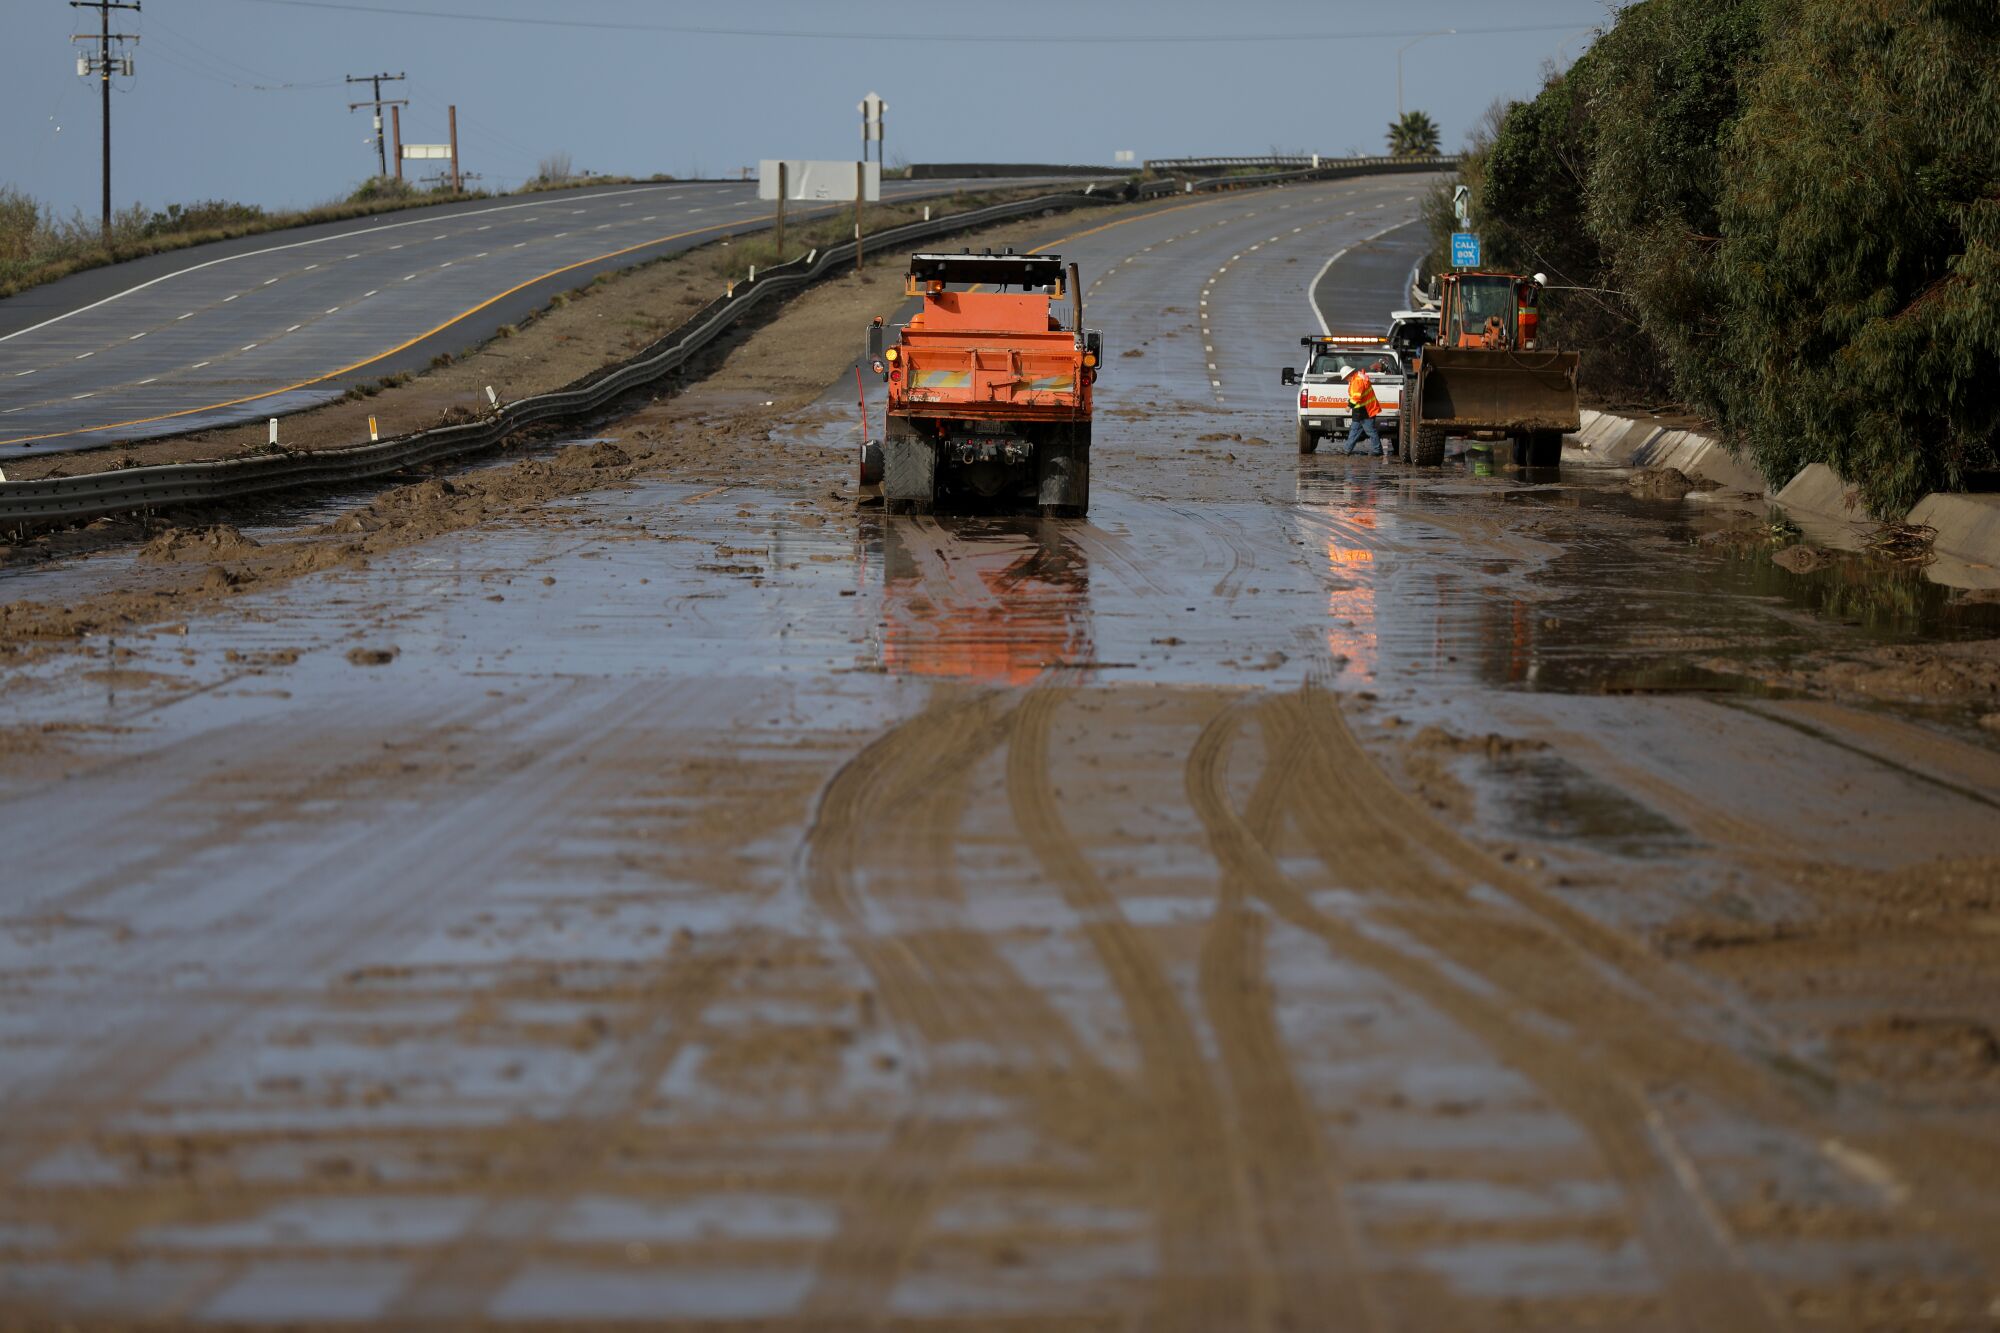 Caltrans removes mud and debris washed up along US 101 northbound lane in Ventura, on Jan. 10.